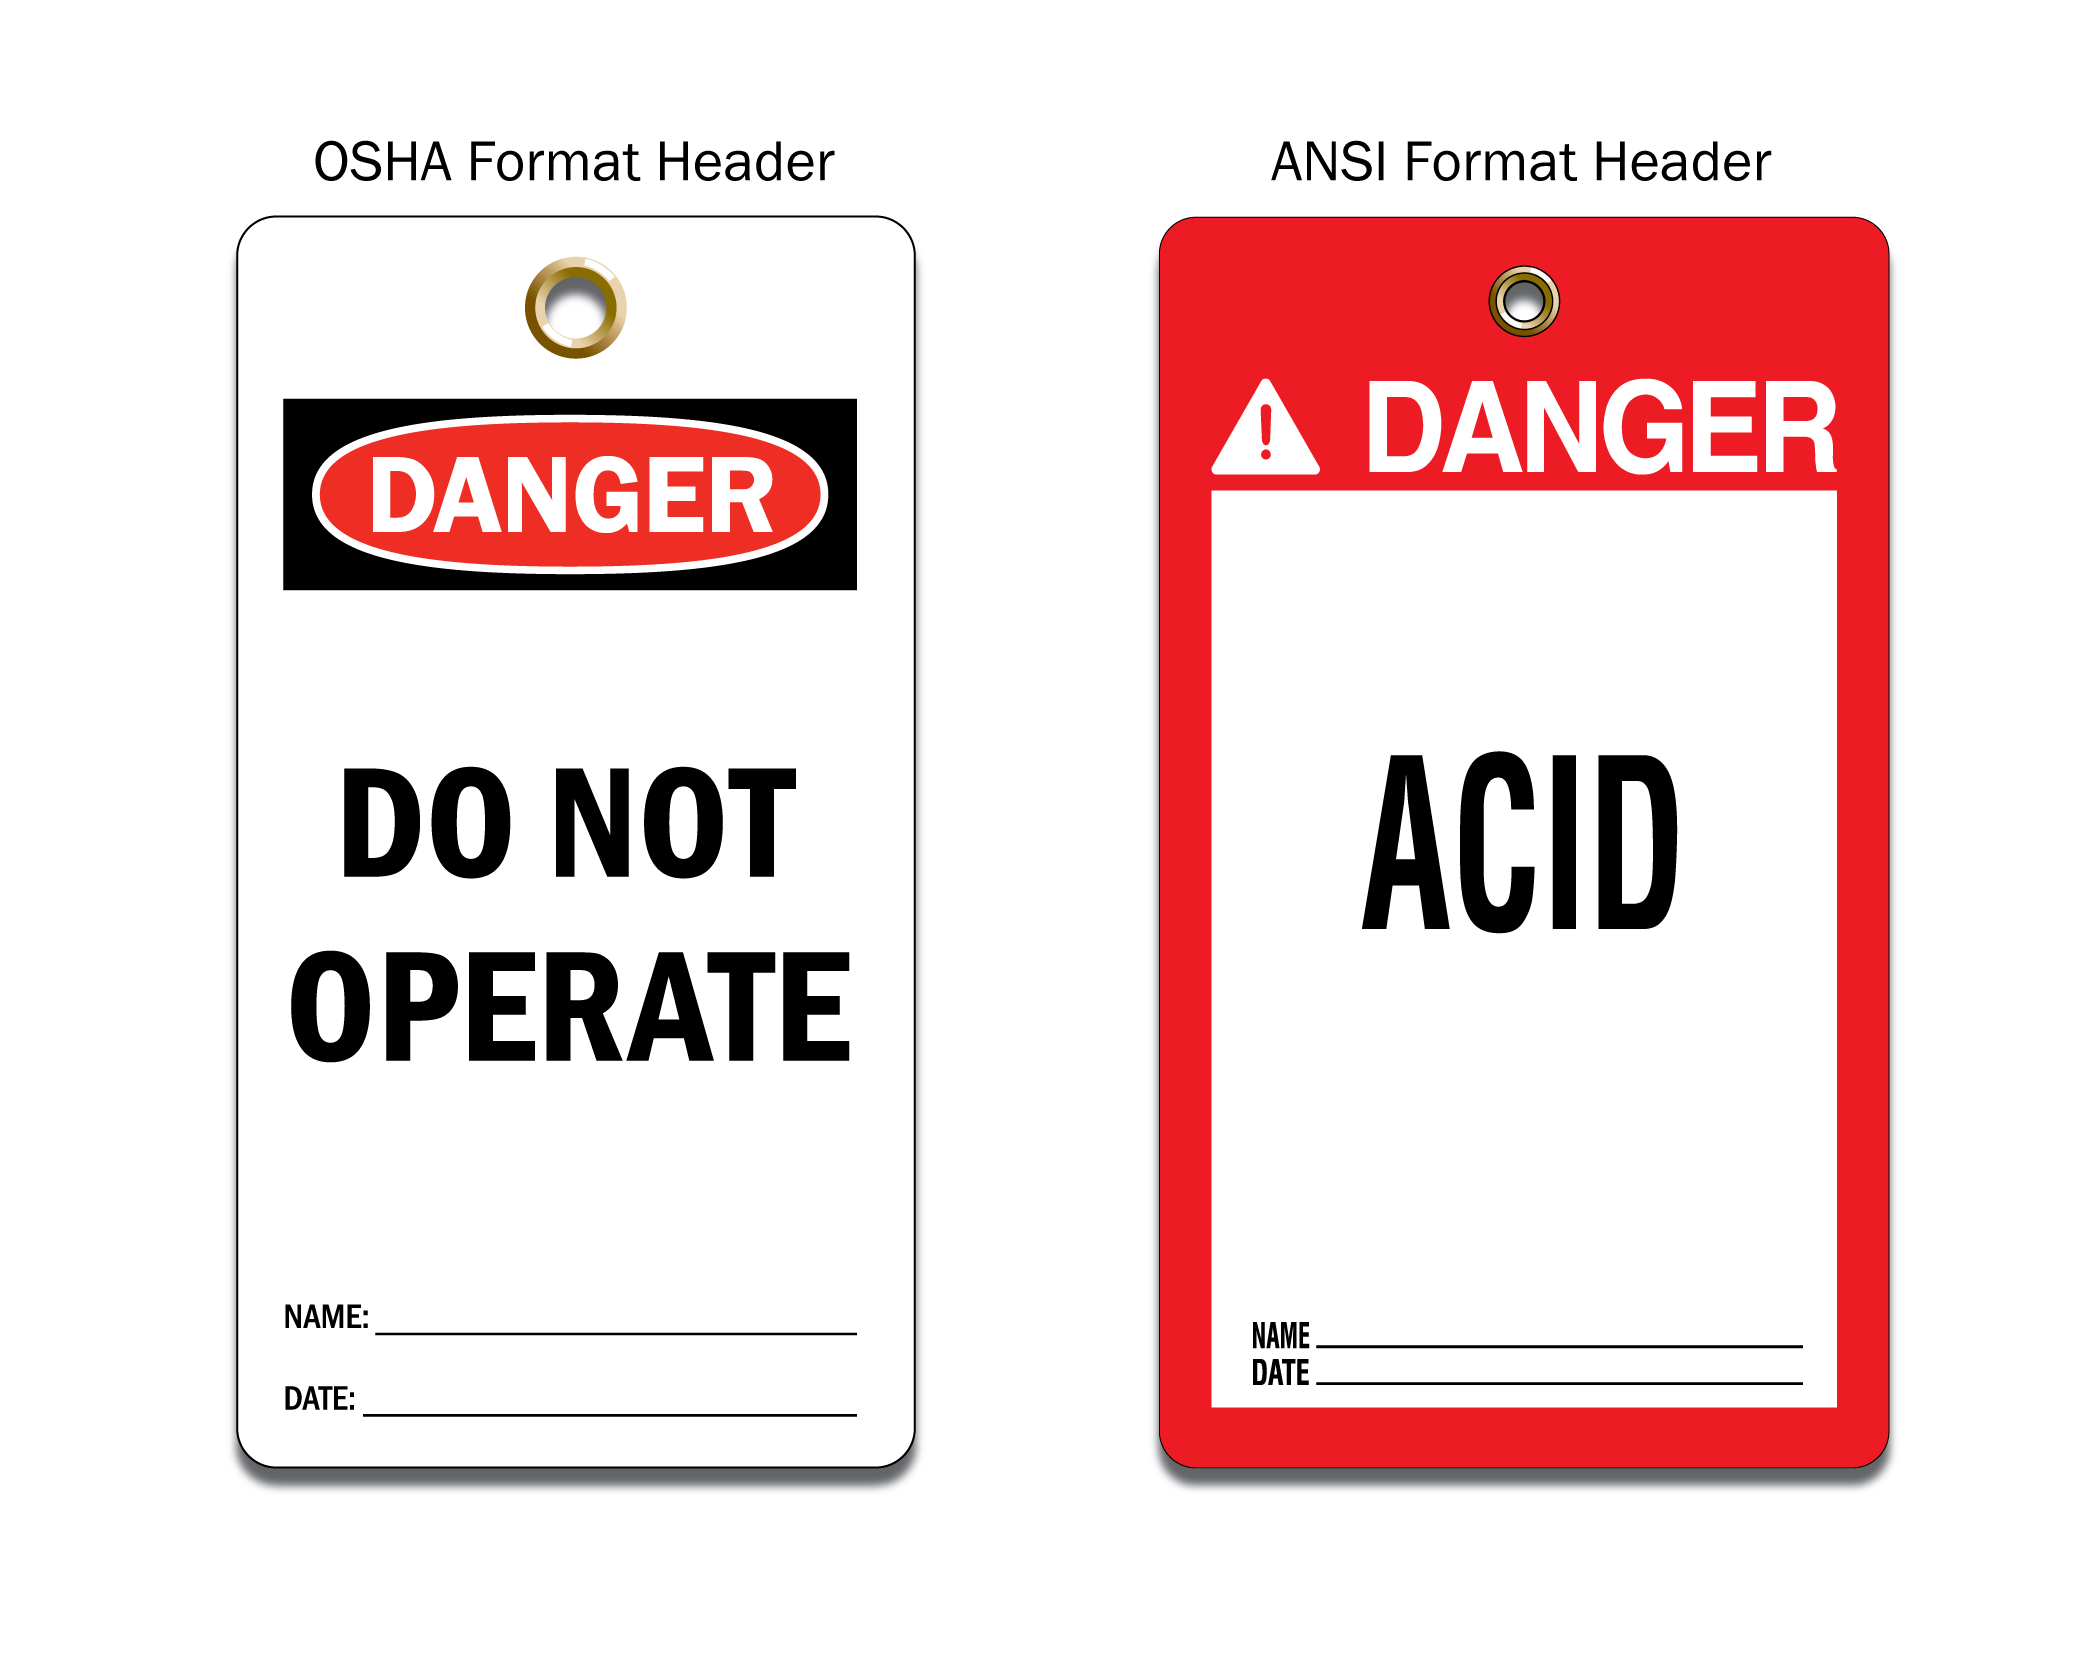 An image of two rectangular Danger tags with black text on red and white backgrounds. One tag is OSHA format and the other is ANSI format.